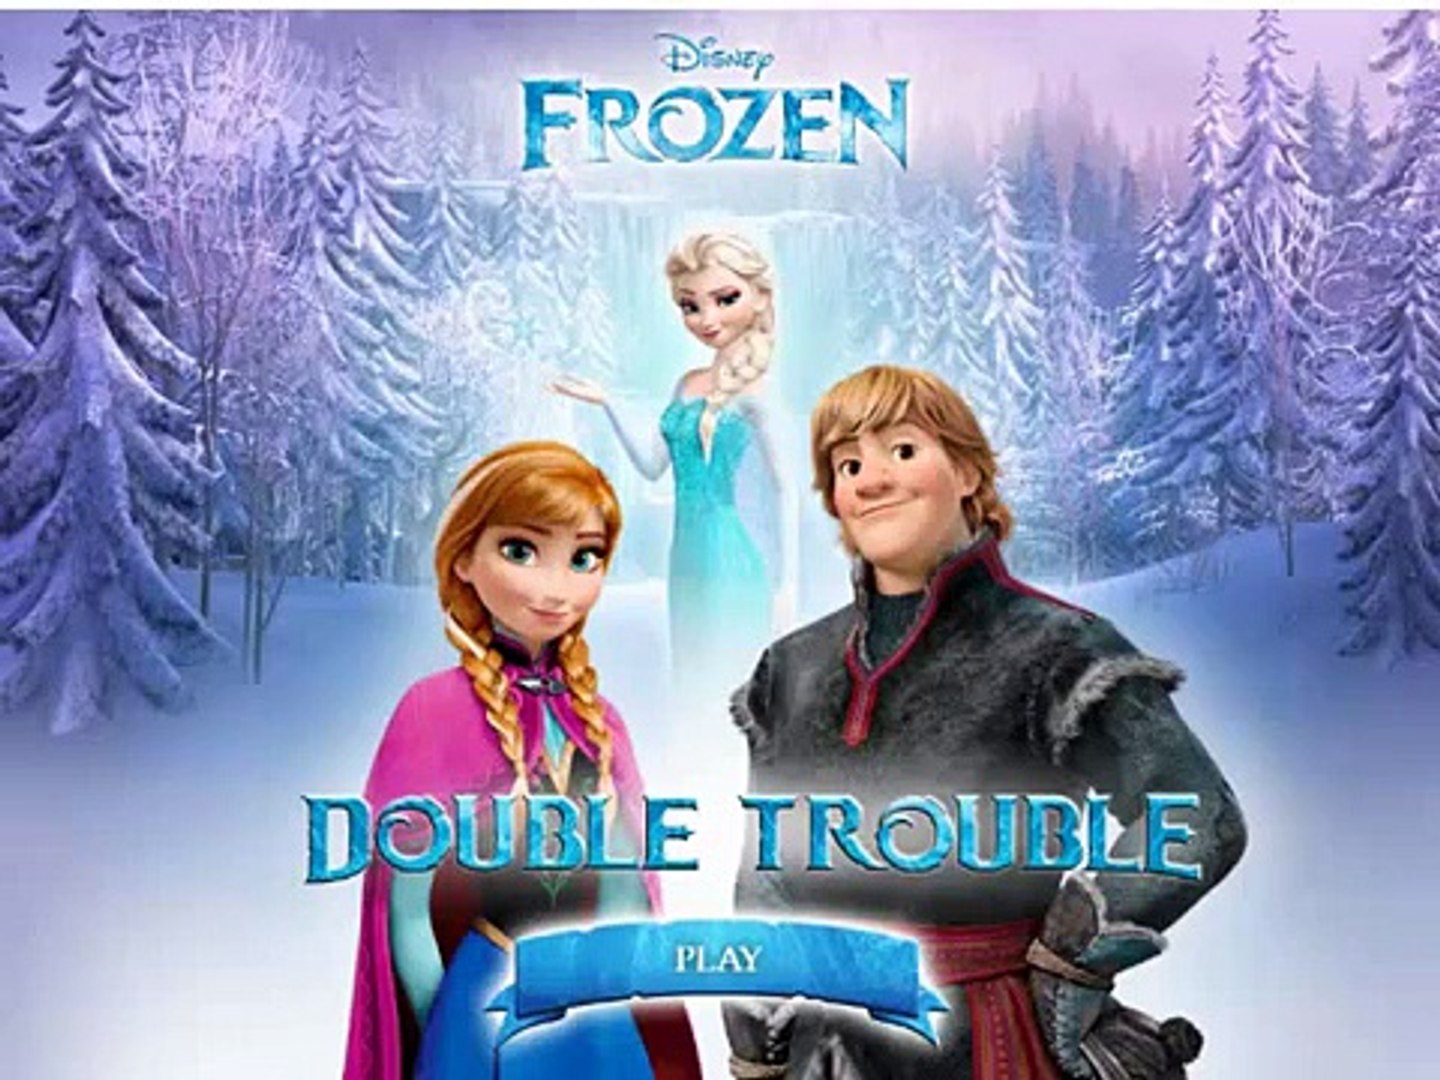 Frozen double trouble game , nice game play for kids , best game for kids , super game for child